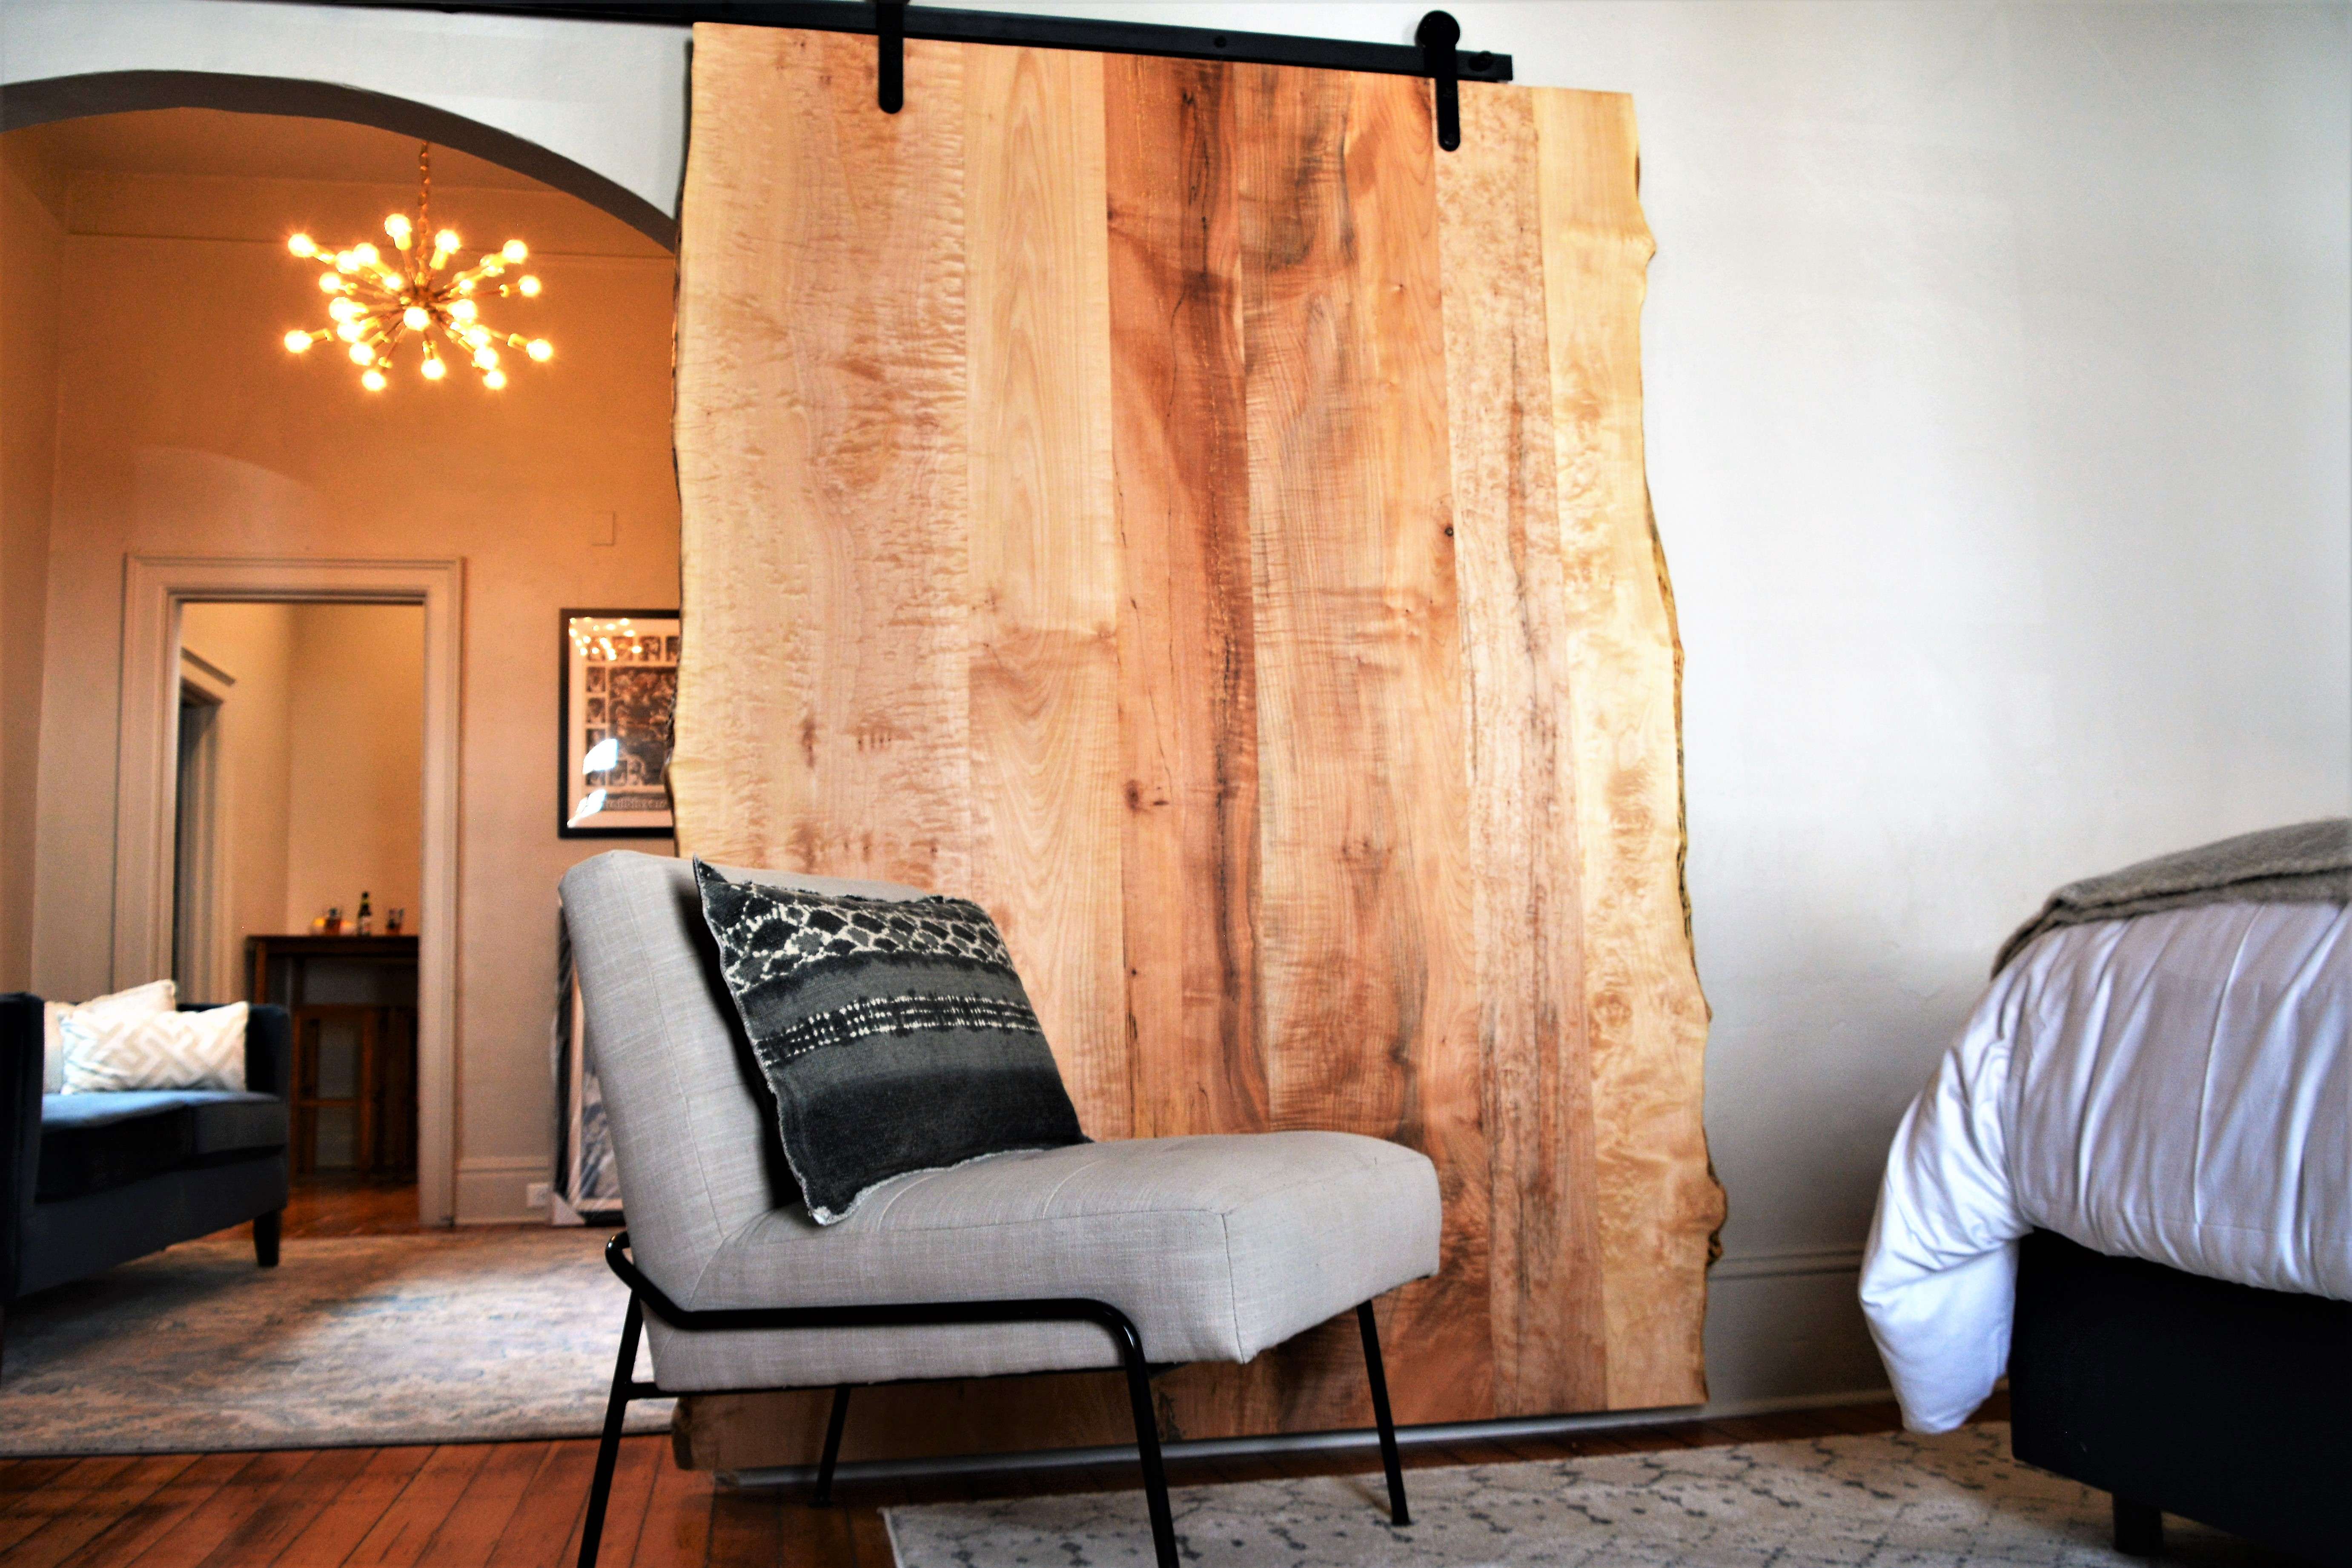 Each tiny home features local fixtures like barn door from Krownlab.